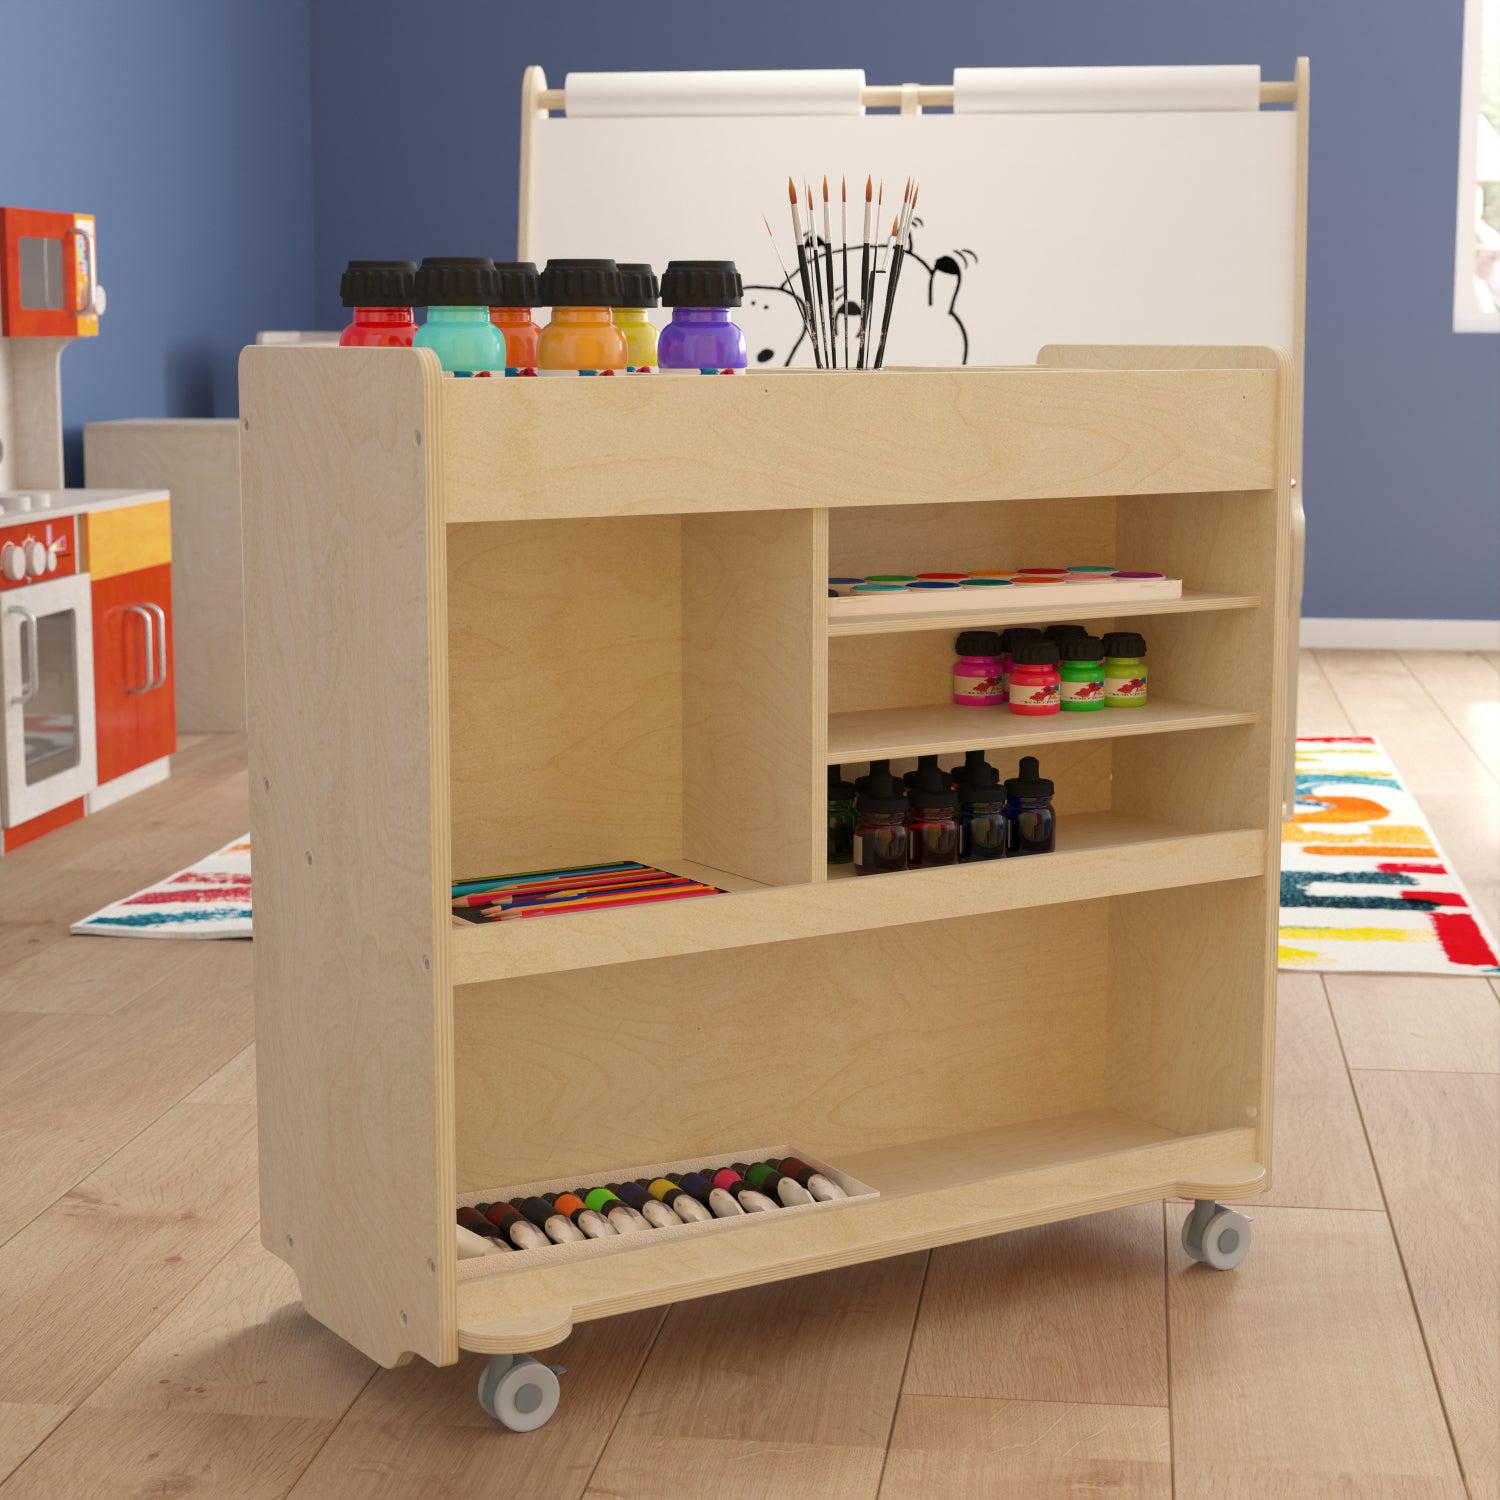 Bright Beginnings Commercial Grade Wooden Mobile Storage Cart with 4 Top Storage Compartments and 5 Cubbies